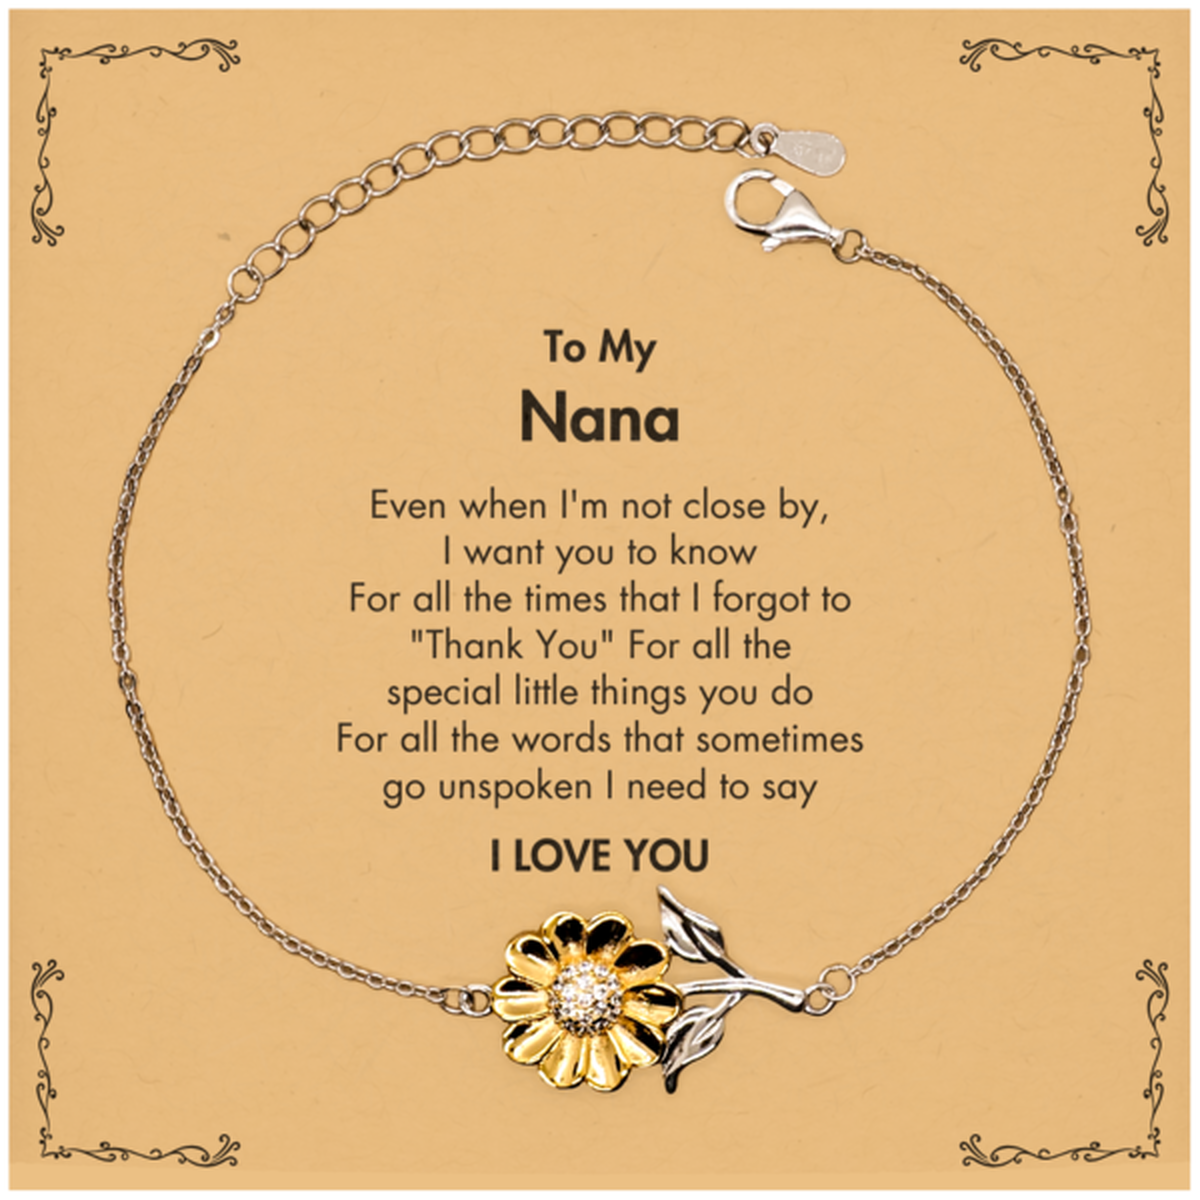 Thank You Gifts for Nana, Keepsake Sunflower Bracelet Gifts for Nana Birthday Mother's day Father's Day Nana For all the words That sometimes go unspoken I need to say I LOVE YOU